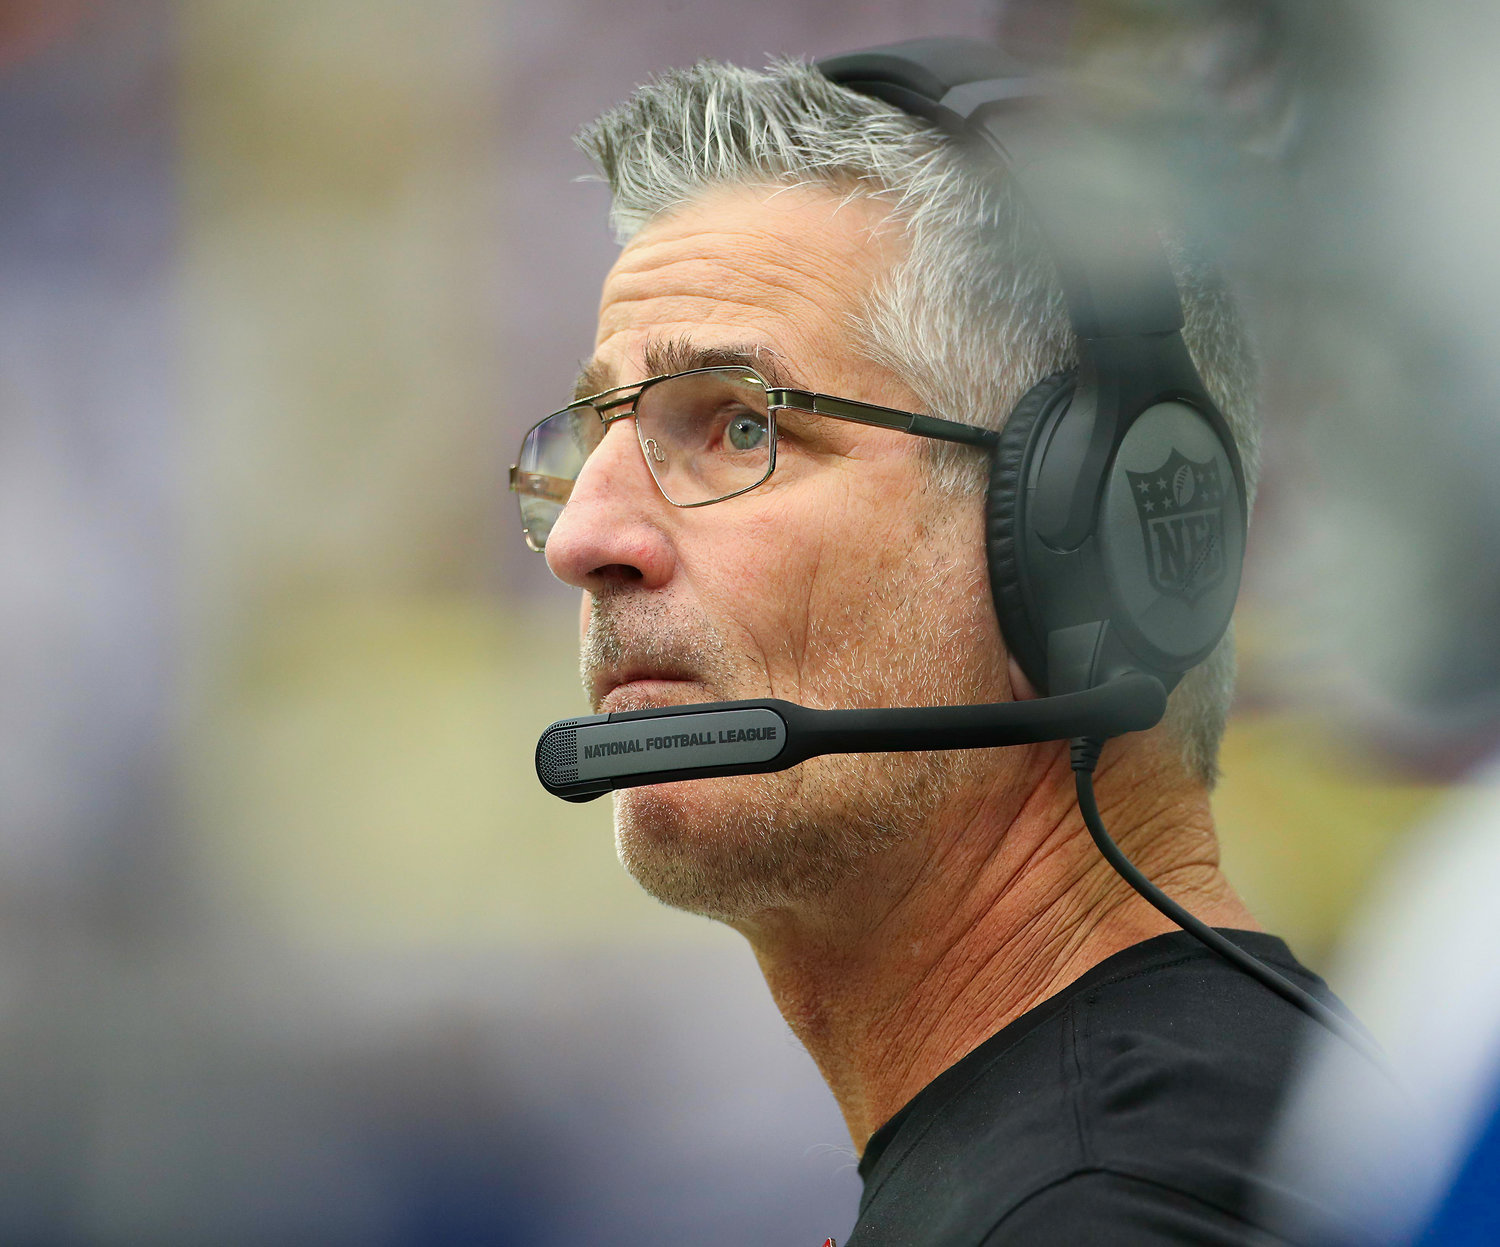 Indianapolis Colts head coach Frank Reich during an NFL game between the Texans and the Colts on September 11, 2022 in Houston. The game ended in a 20-20 tie after a scoreless overtime period.